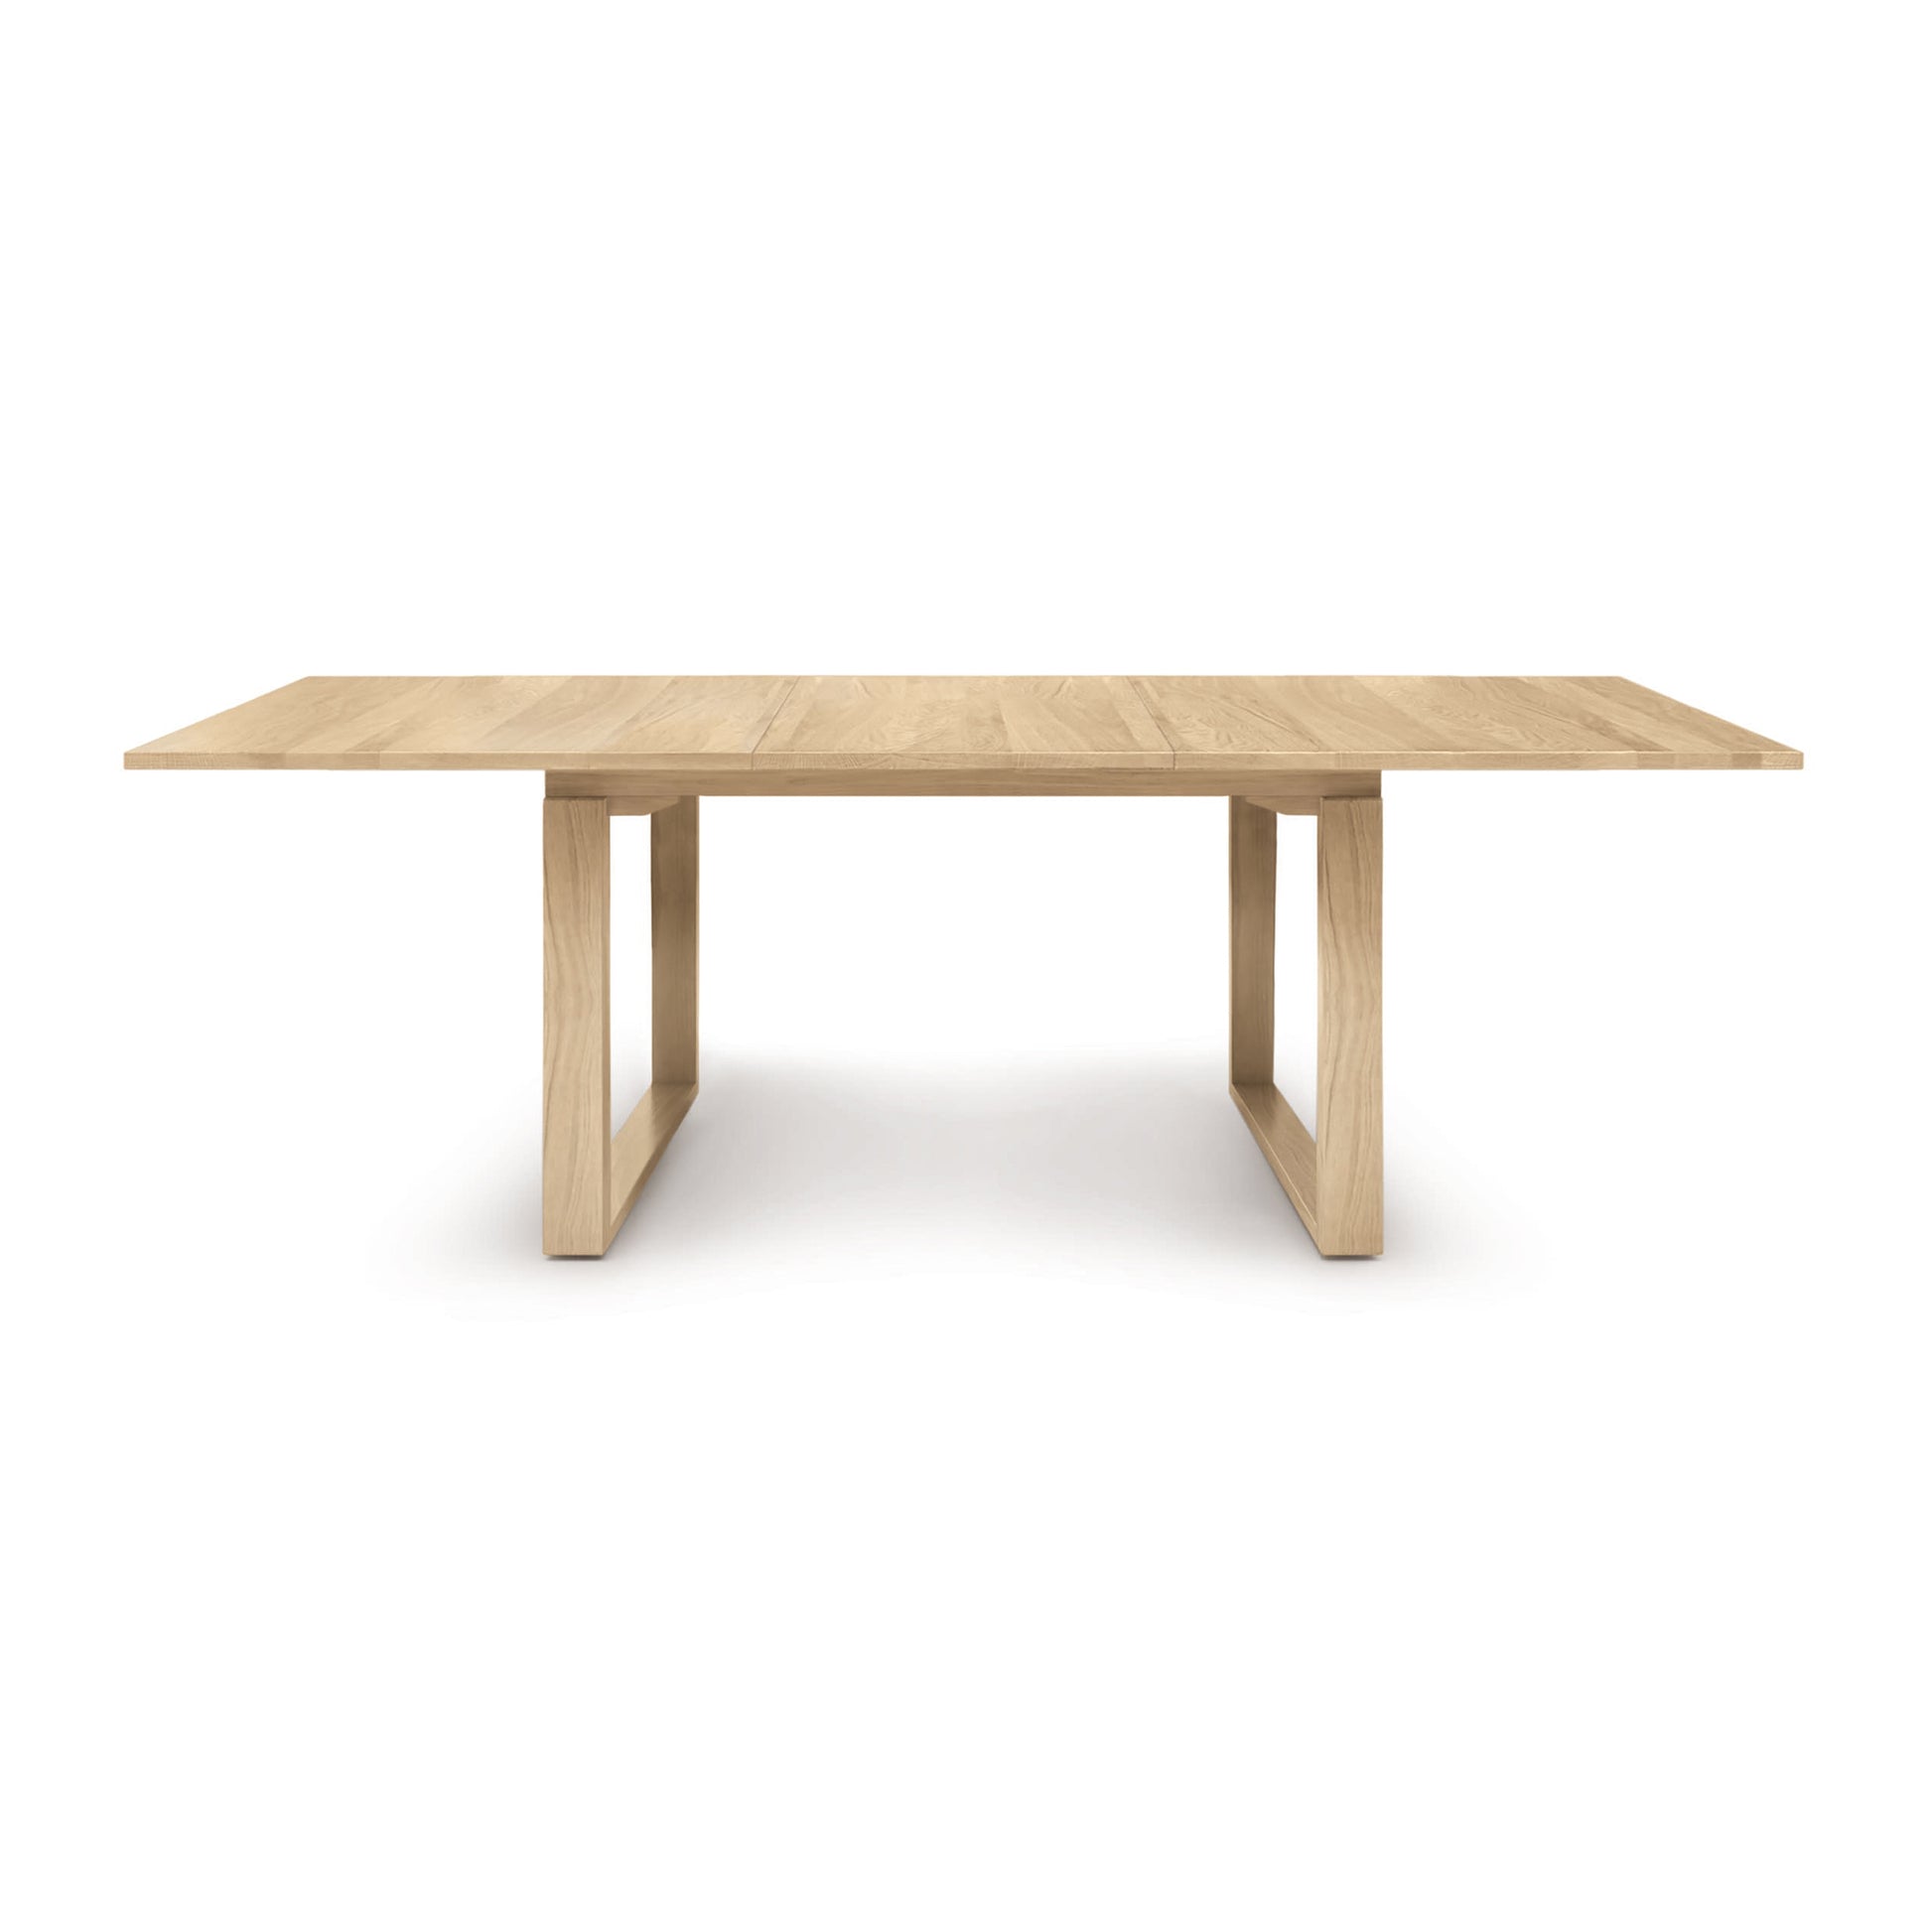 Modern Iso Extension Dining Table from Copeland Furniture on a white background.